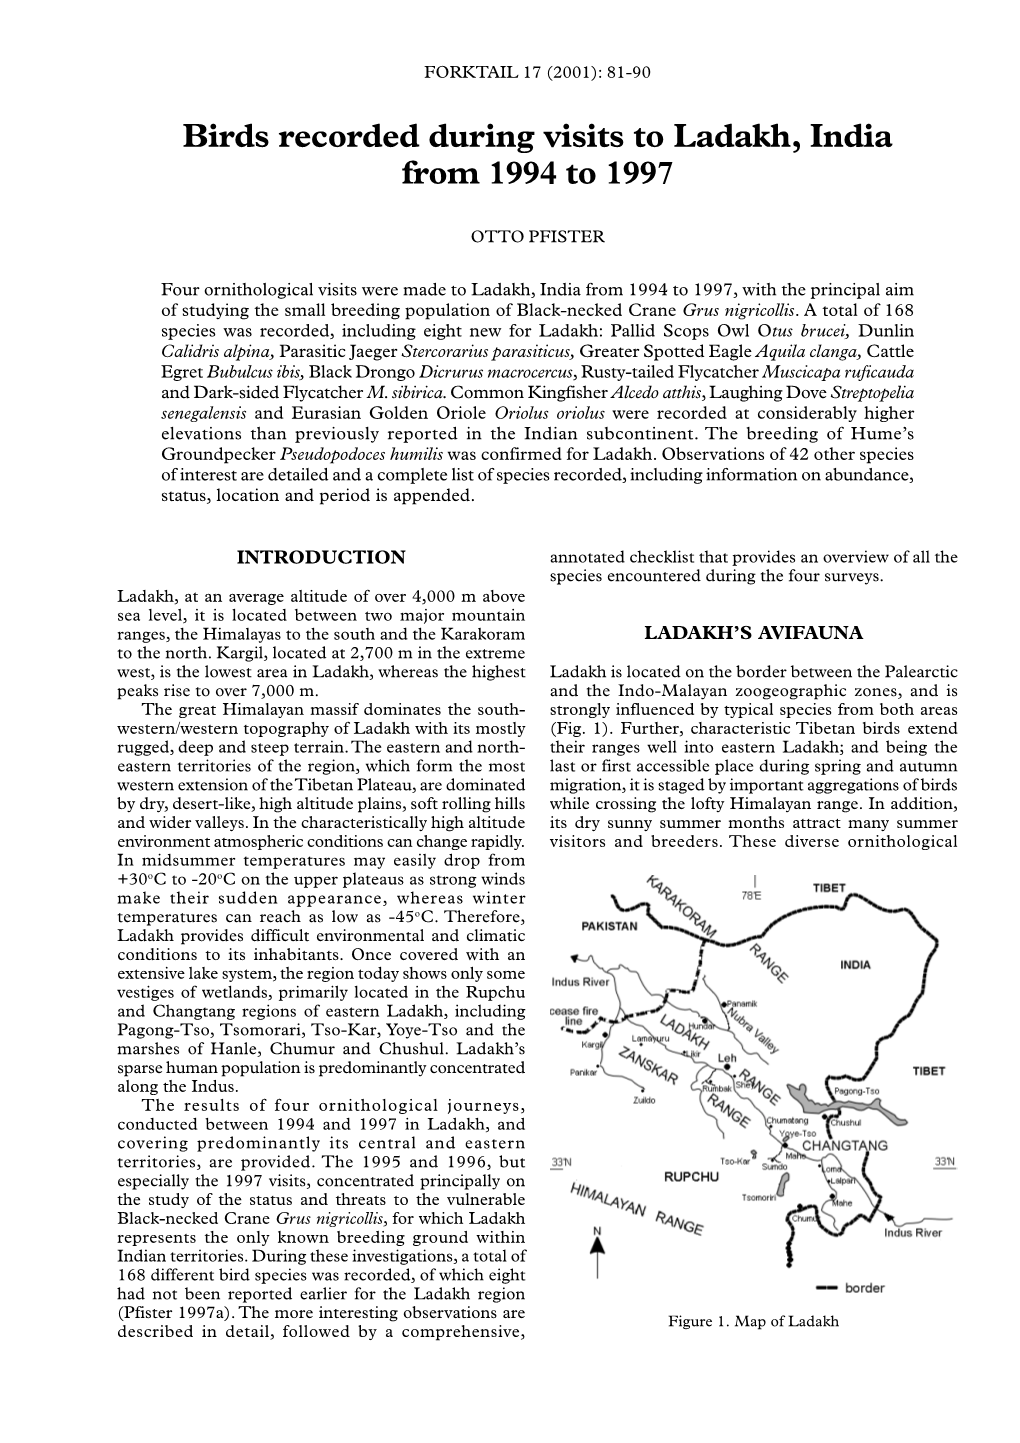 Birds Recorded During Visits to Ladakh, India from 1994 to 1997